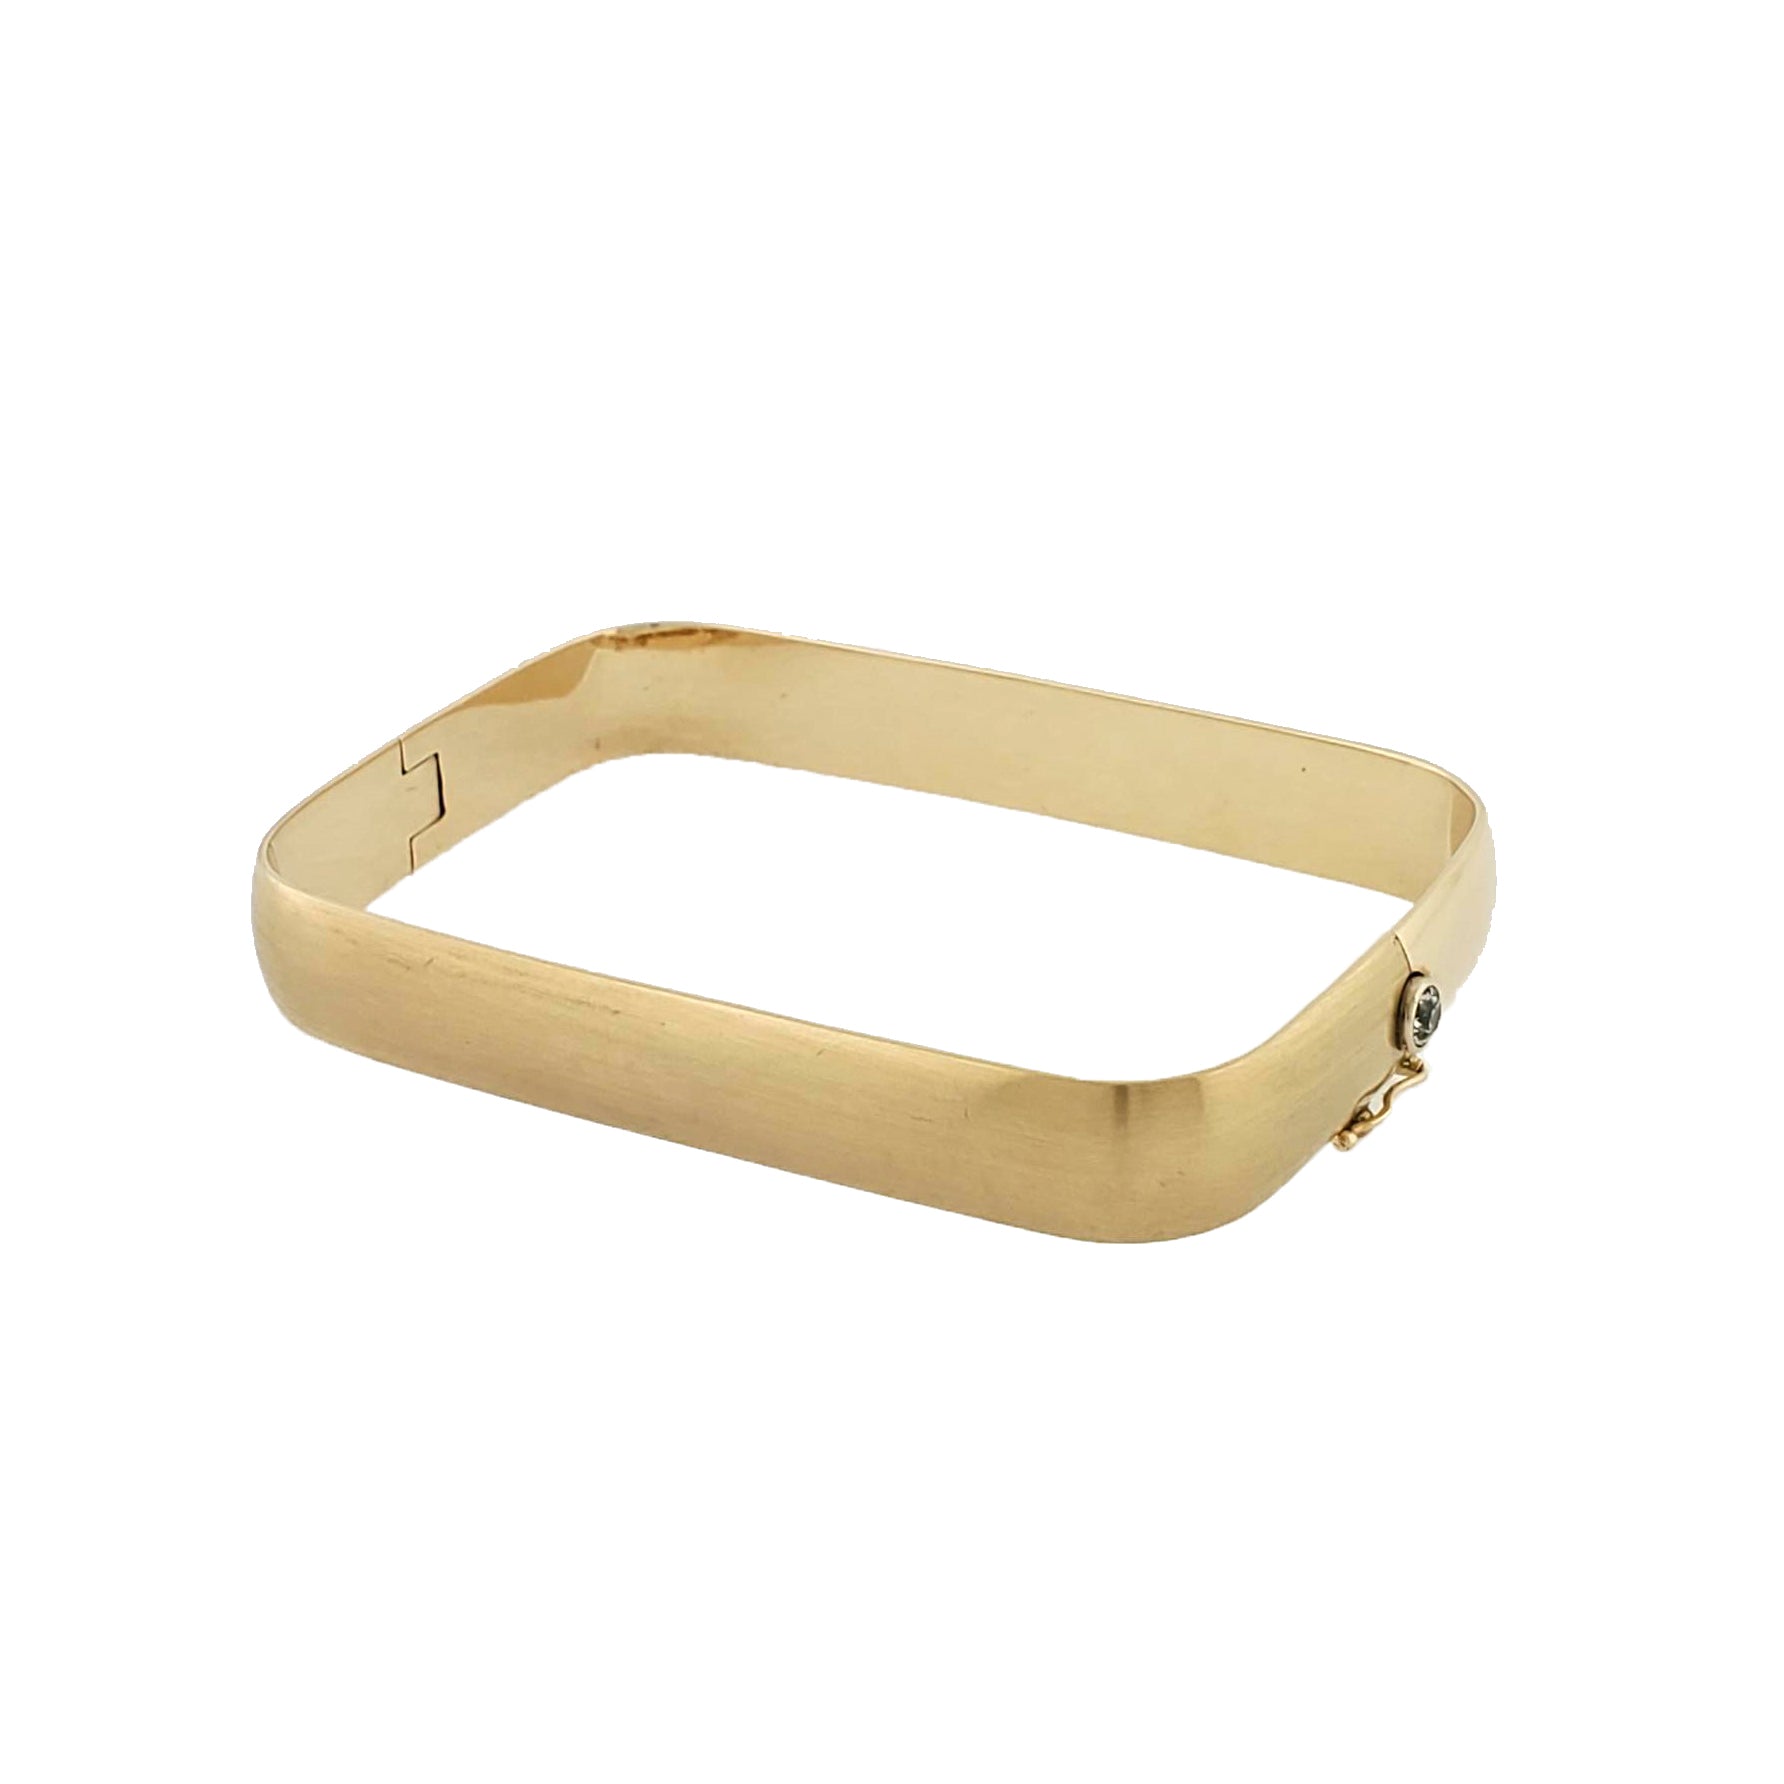 14K Y/G Brushed and Polished Textured Square Bangle